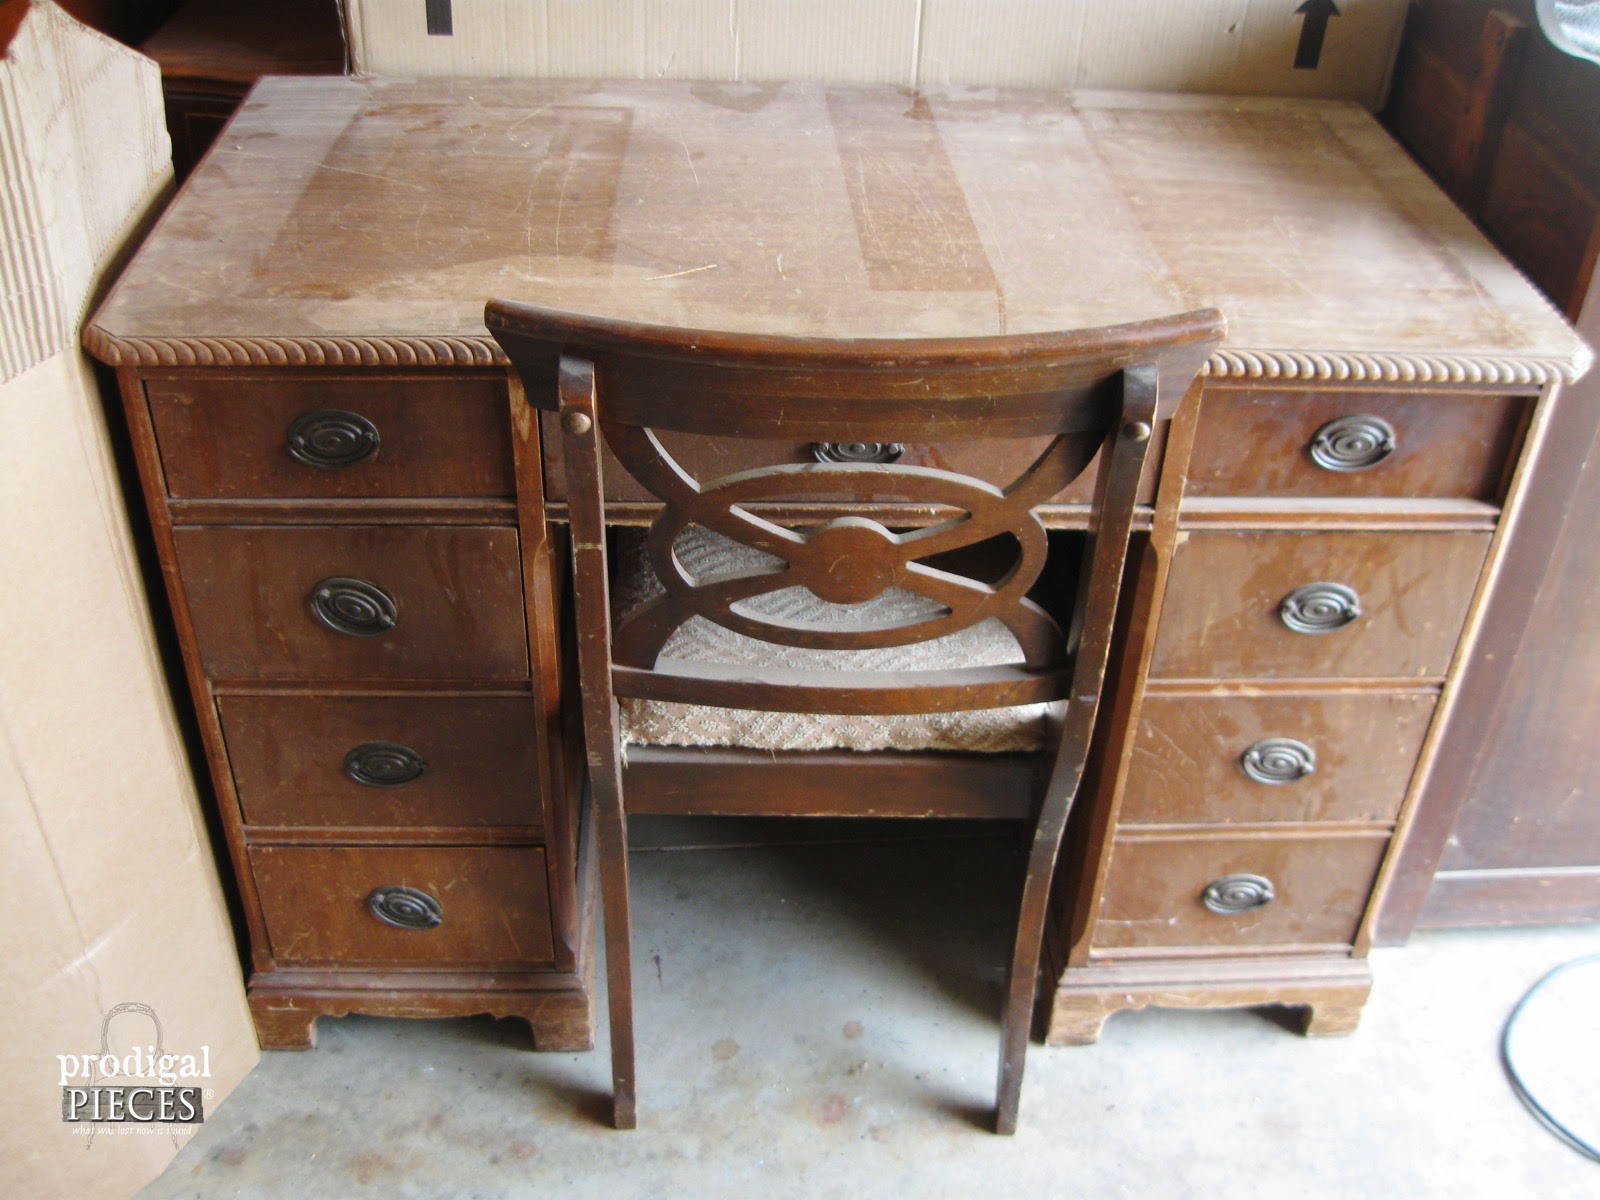 Antique Desk Before Makeover by Prodigal Pieces | prodigalpieces.com #prodigalpieces